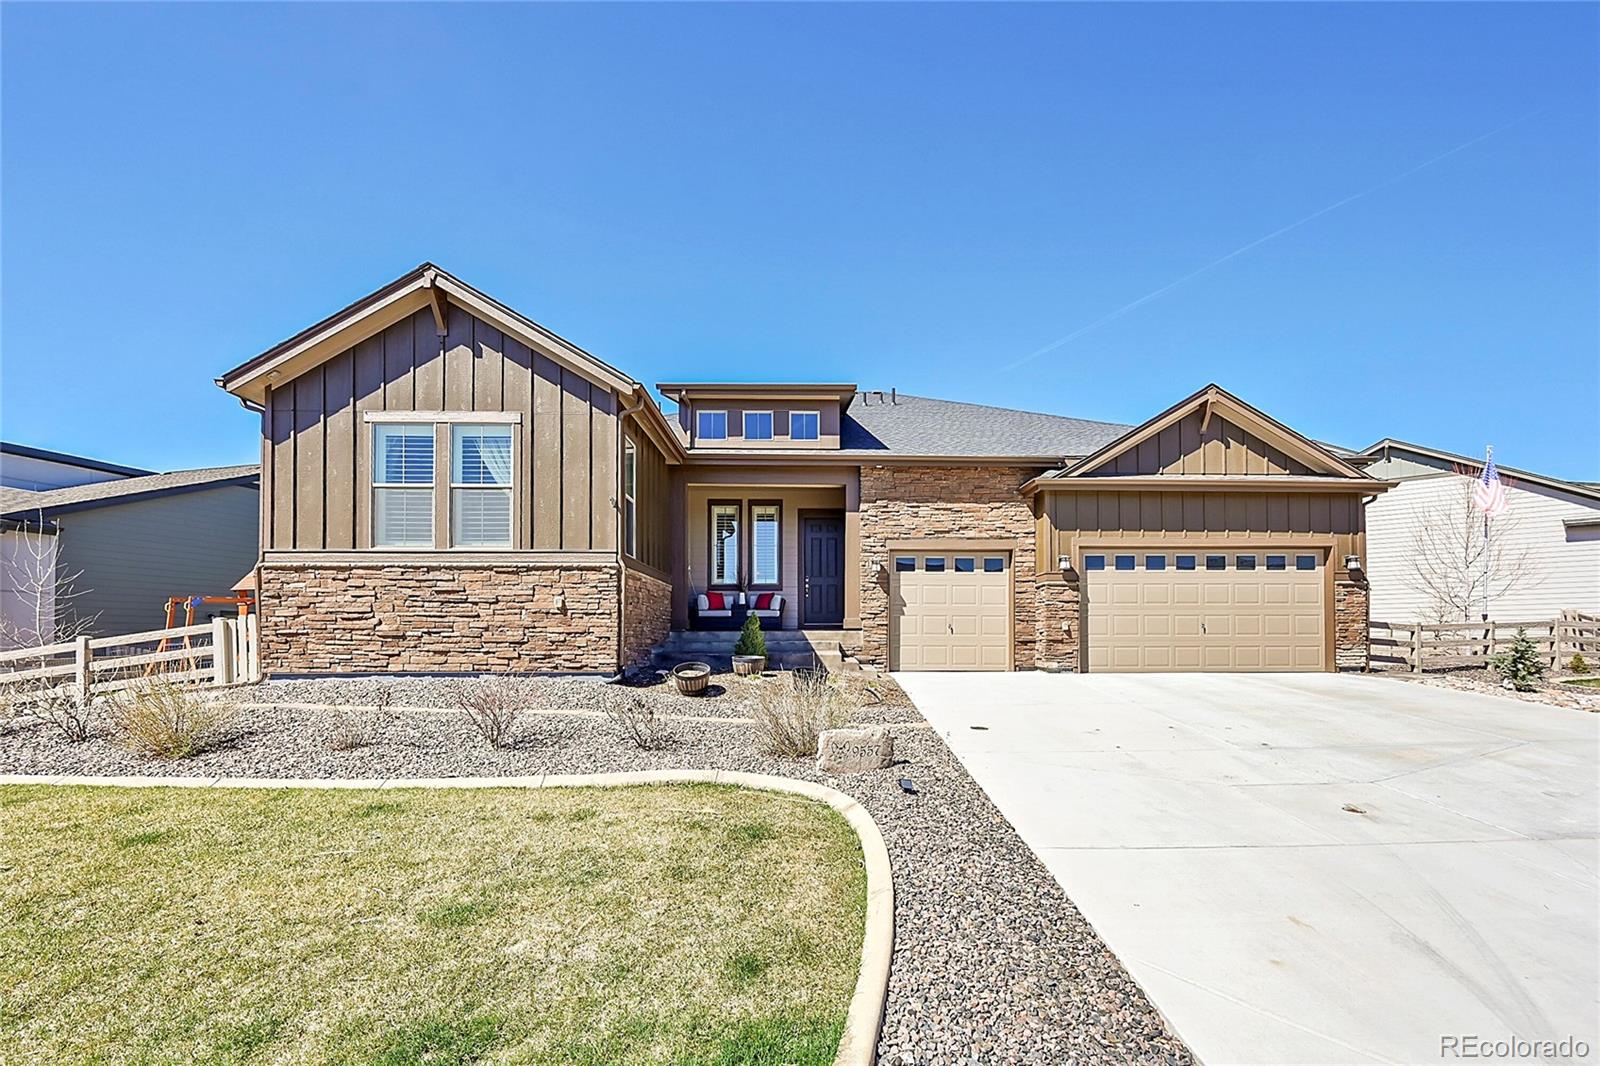 9557  boone lane, Littleton sold home. Closed on 2024-06-03 for $973,000.